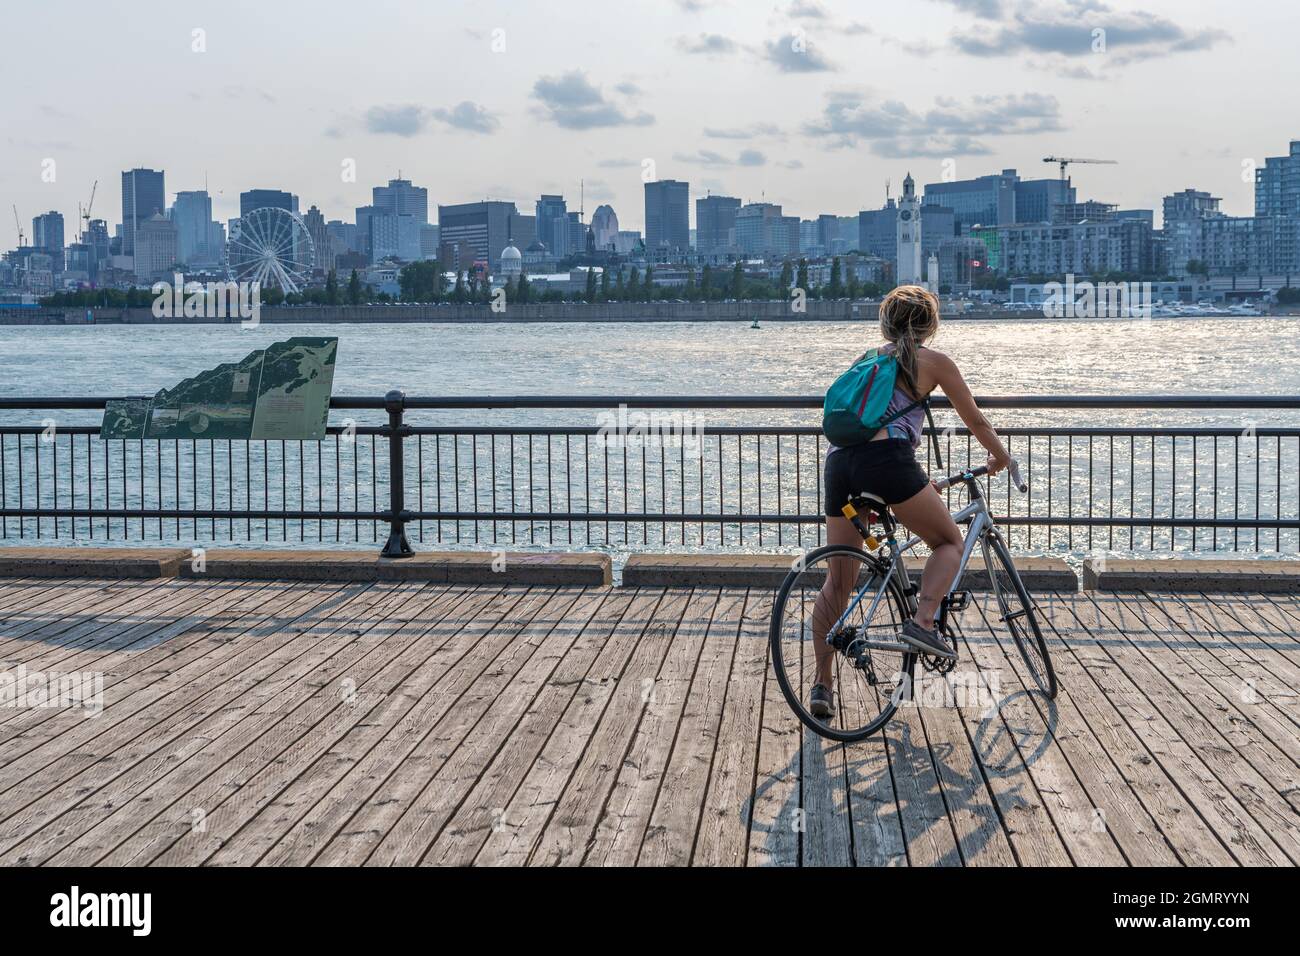 Montreal, Quebec, Canada - August 3 2021 : A woman rides a bicycle and watching the sunset in Jean-Drapeau park maritime shuttle landing stage. Saint Stock Photo